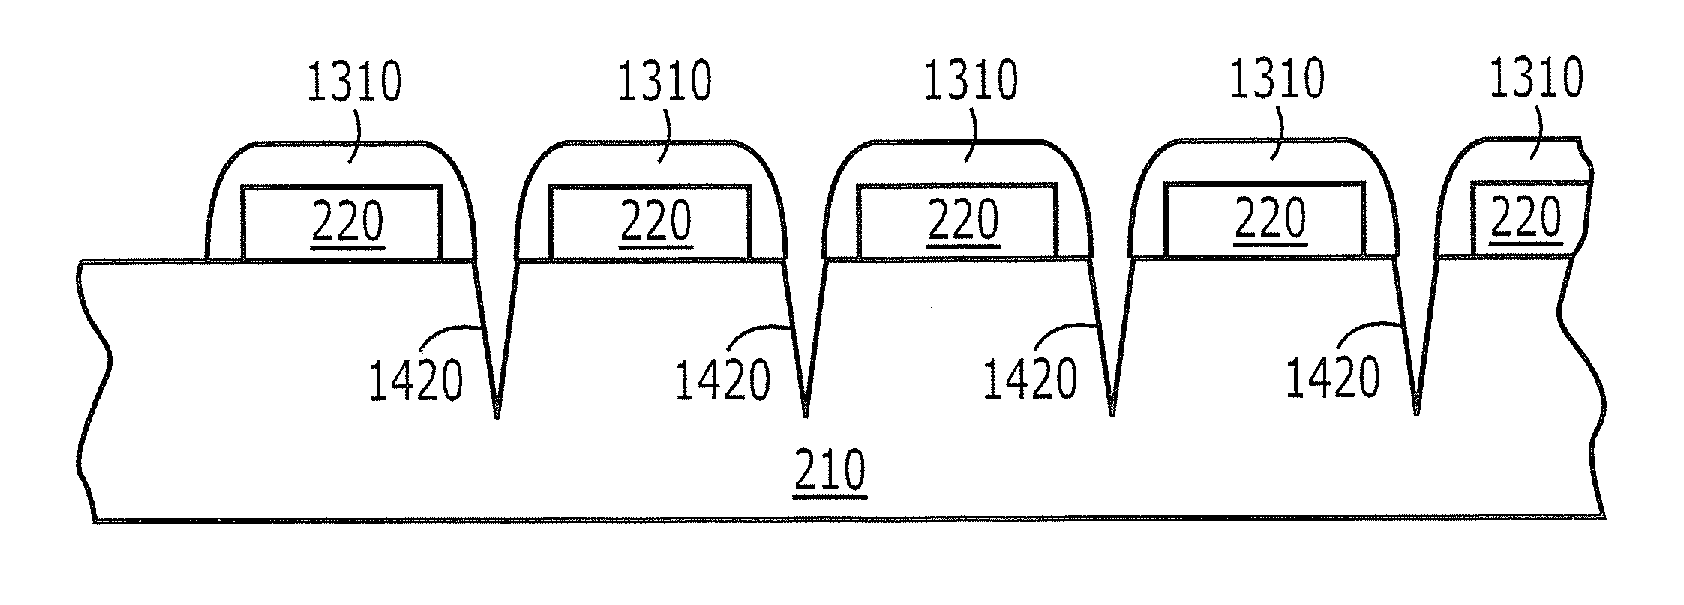 Front end scribing of light emitting diode (LED) wafers and resulting devices